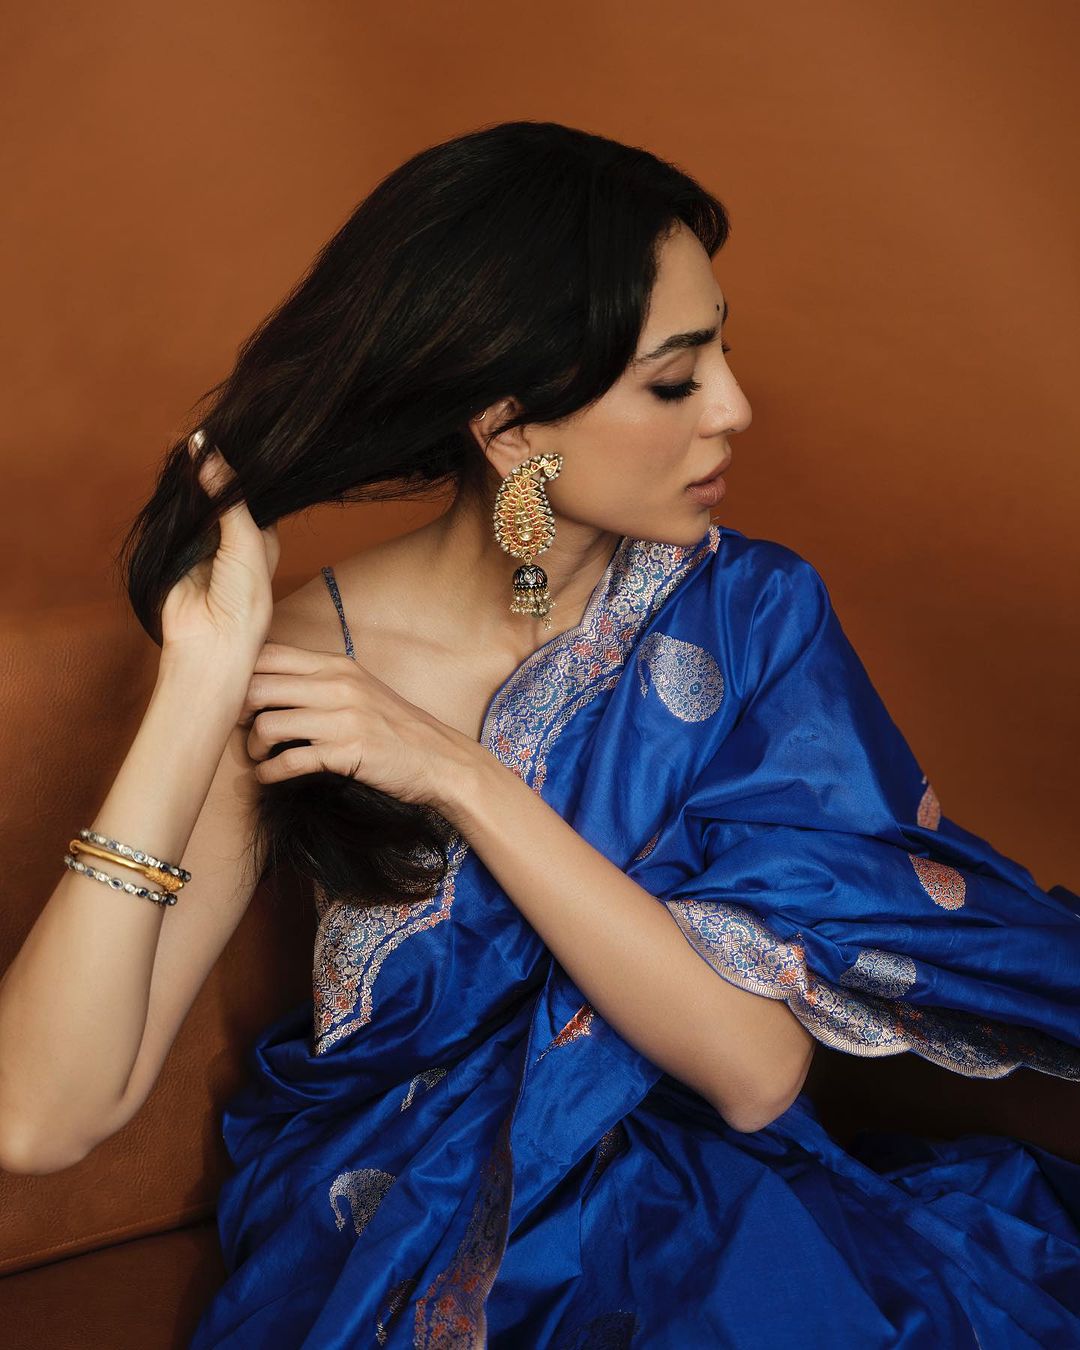 Sobhita Dhulipala Leaves Us Spellbound In A Blue Saree - SEE PICS